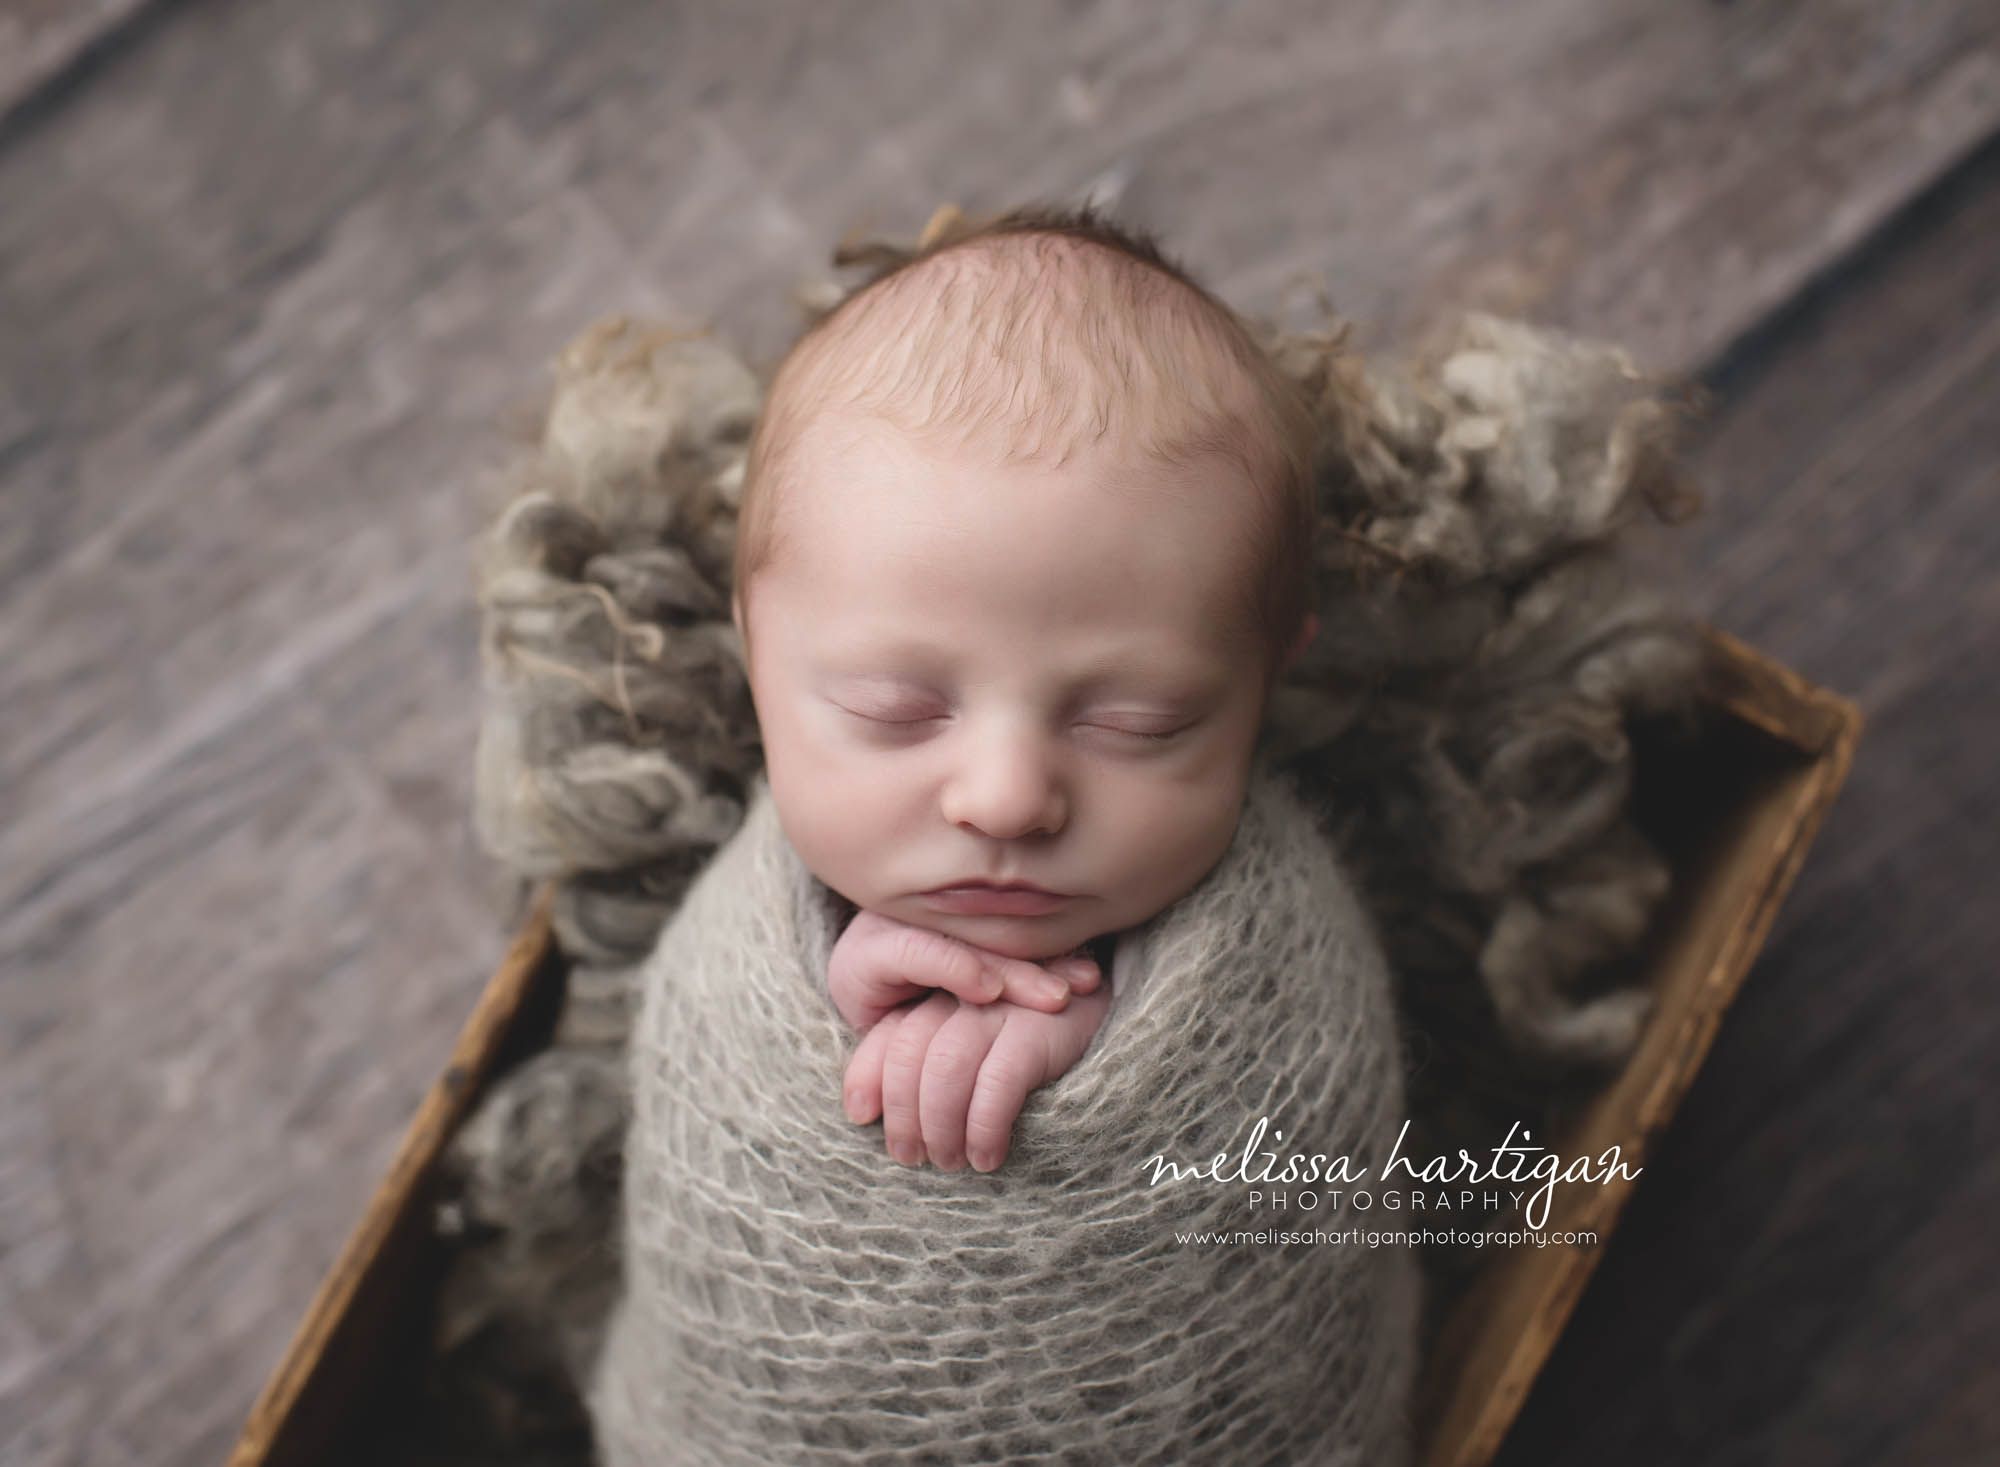 Melissa Hartigan Photography Coventry CT Newborn & Maternity Photographer Coventry CT Maternity Newborn Session Chase sleeping in wooden box wrapped in gray with hands out